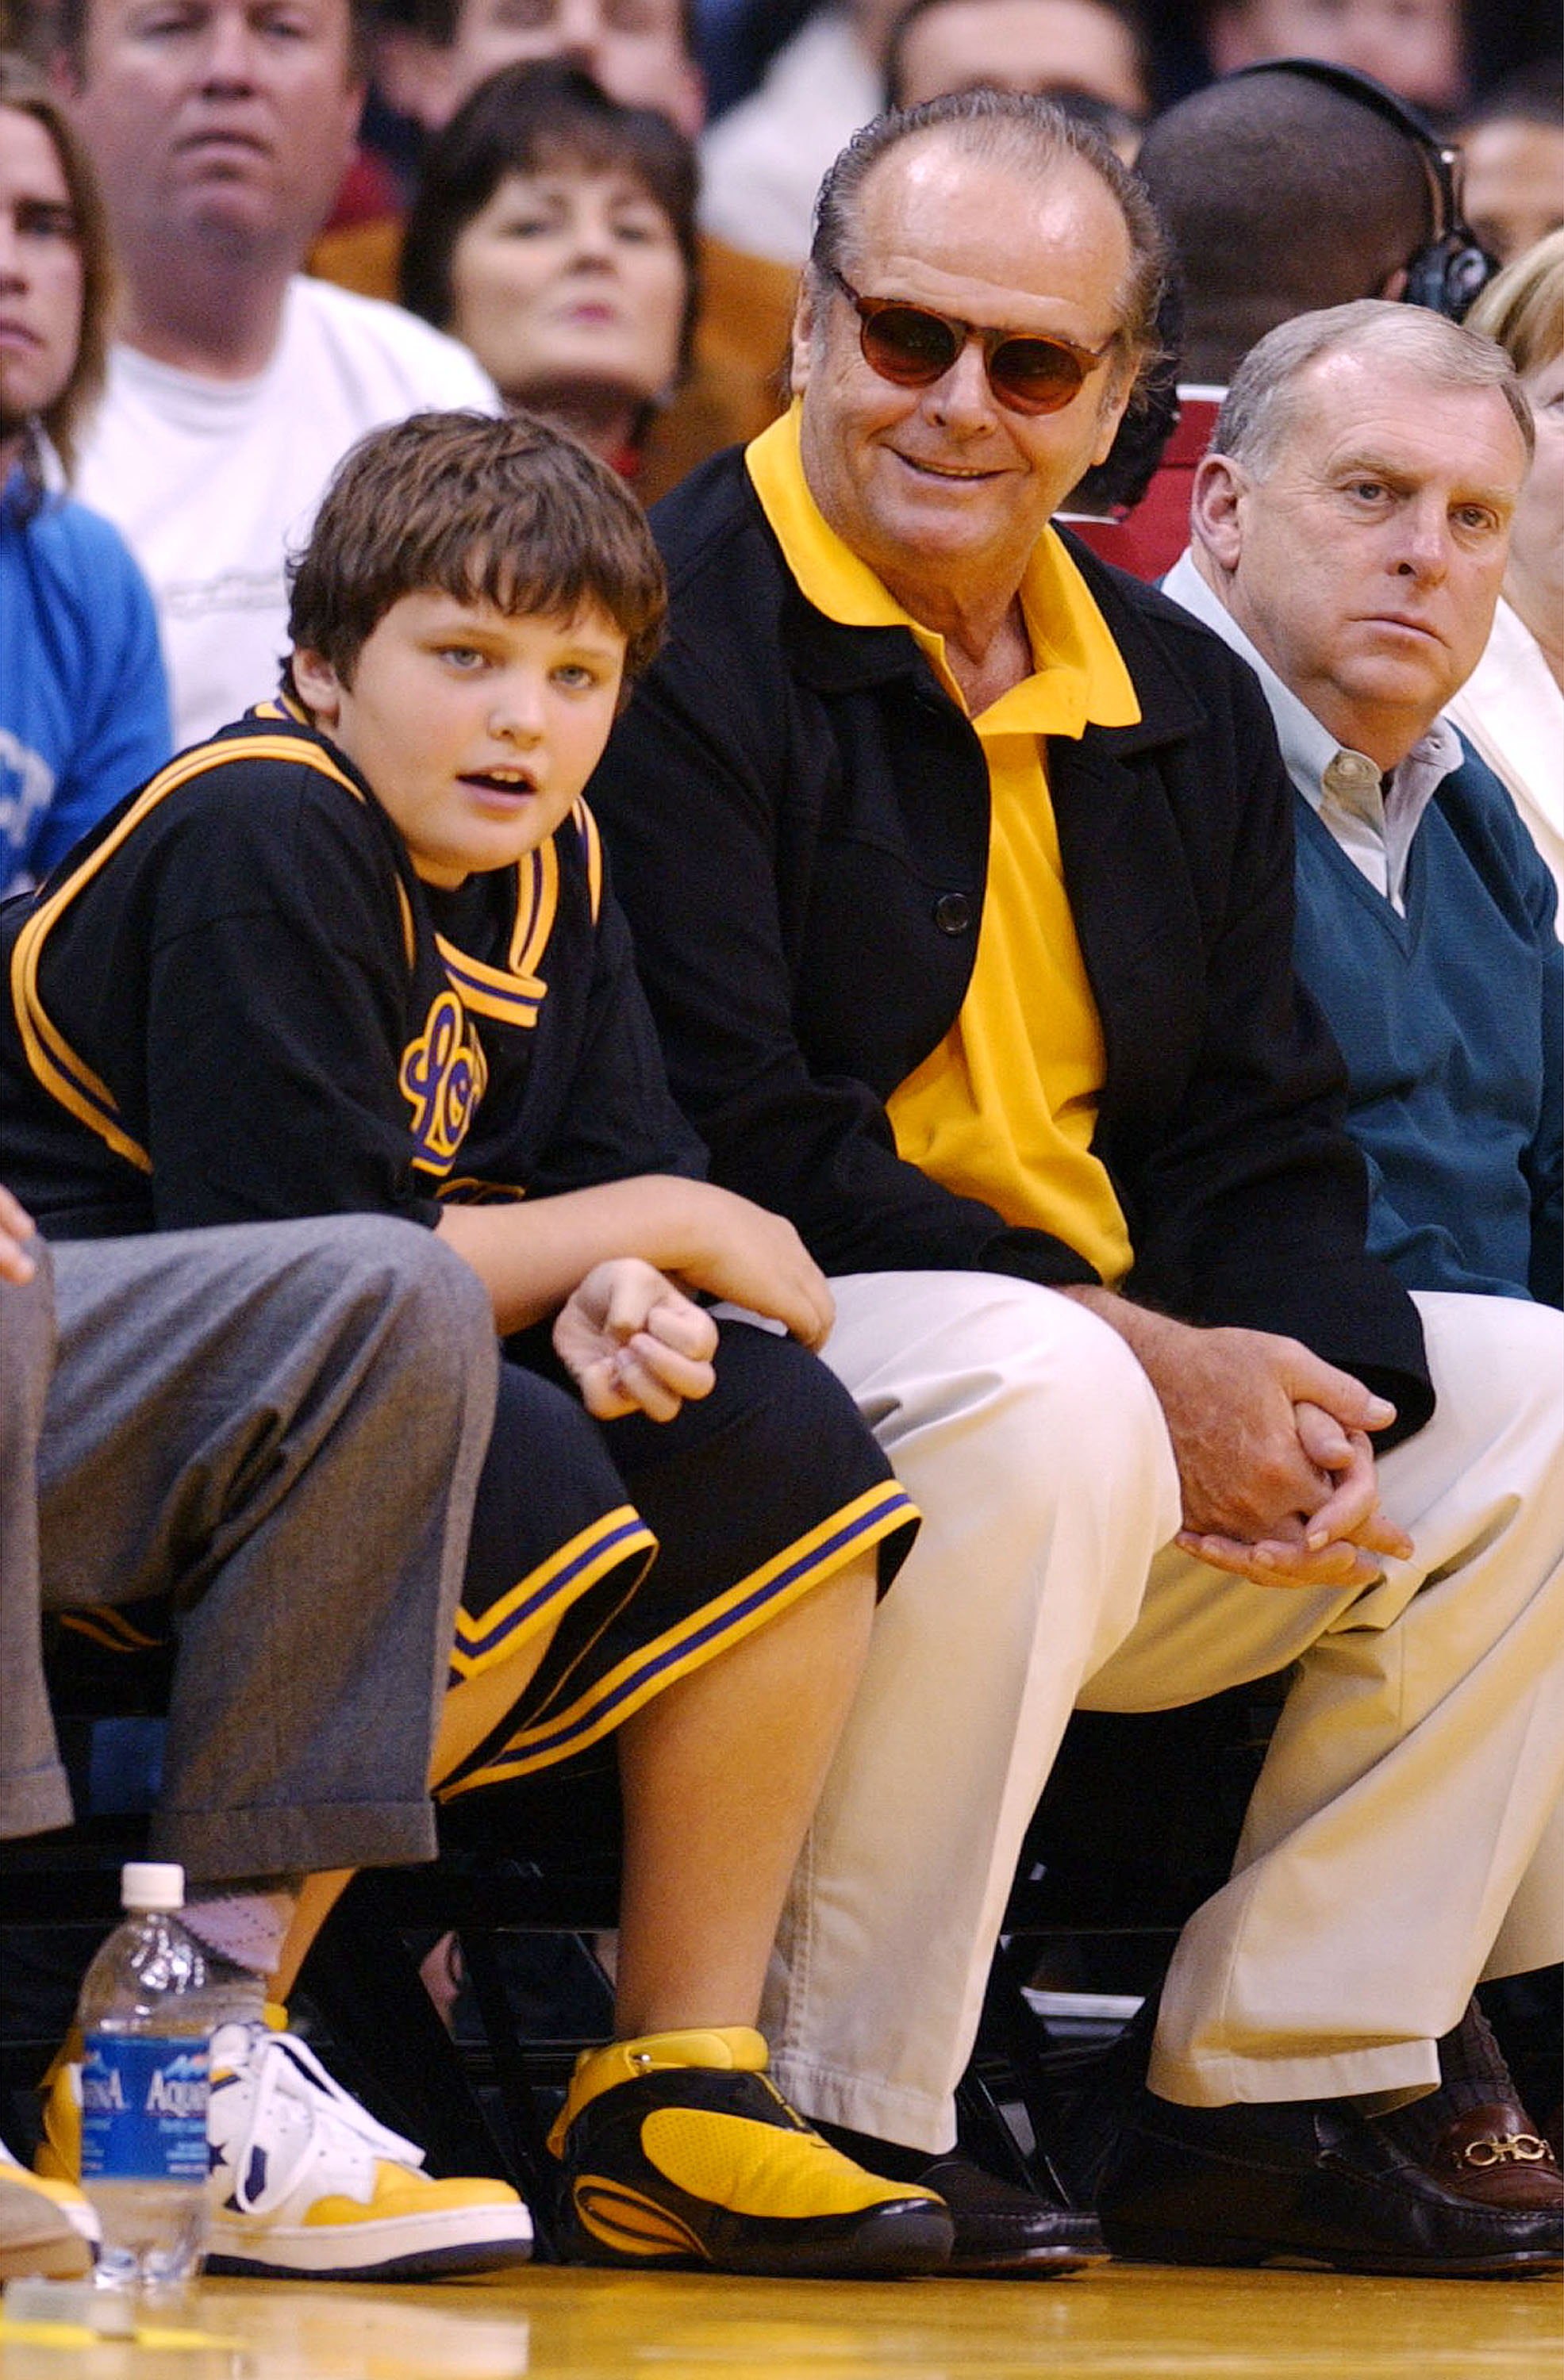 <p><span>Jack Nicholson brought then-11-year-old son Raymond, whose mother is actress-model Rebecca Broussard, to a Los Angeles Lakers basketball game on Feb. 23, 2003. Keep reading to see him now that he's an adult who's an actor...</span></p>